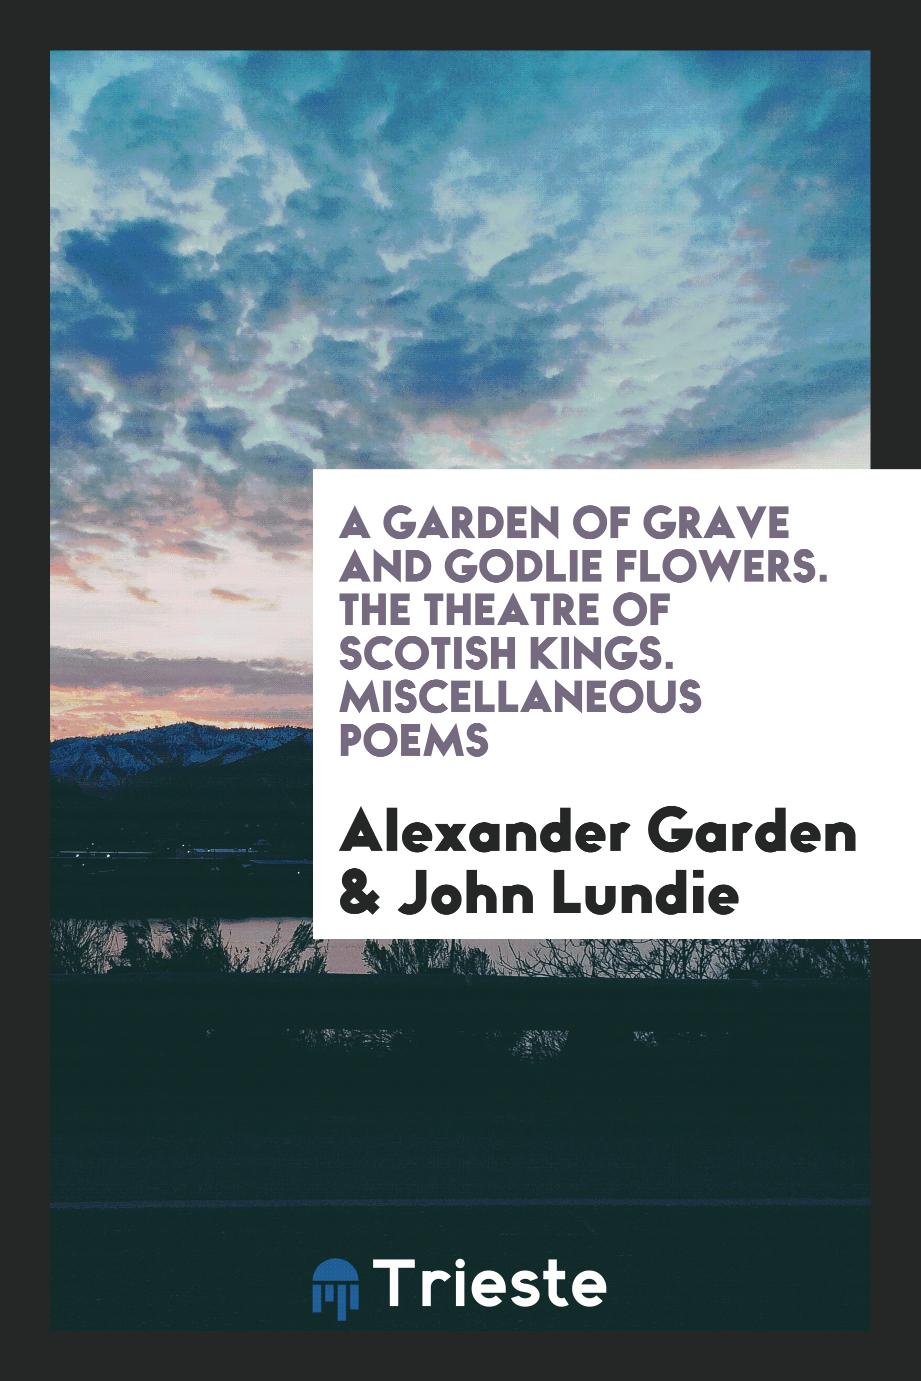 A Garden of Grave and Godlie Flowers. The Theatre of Scottish Kings. Miscellaneous Poems